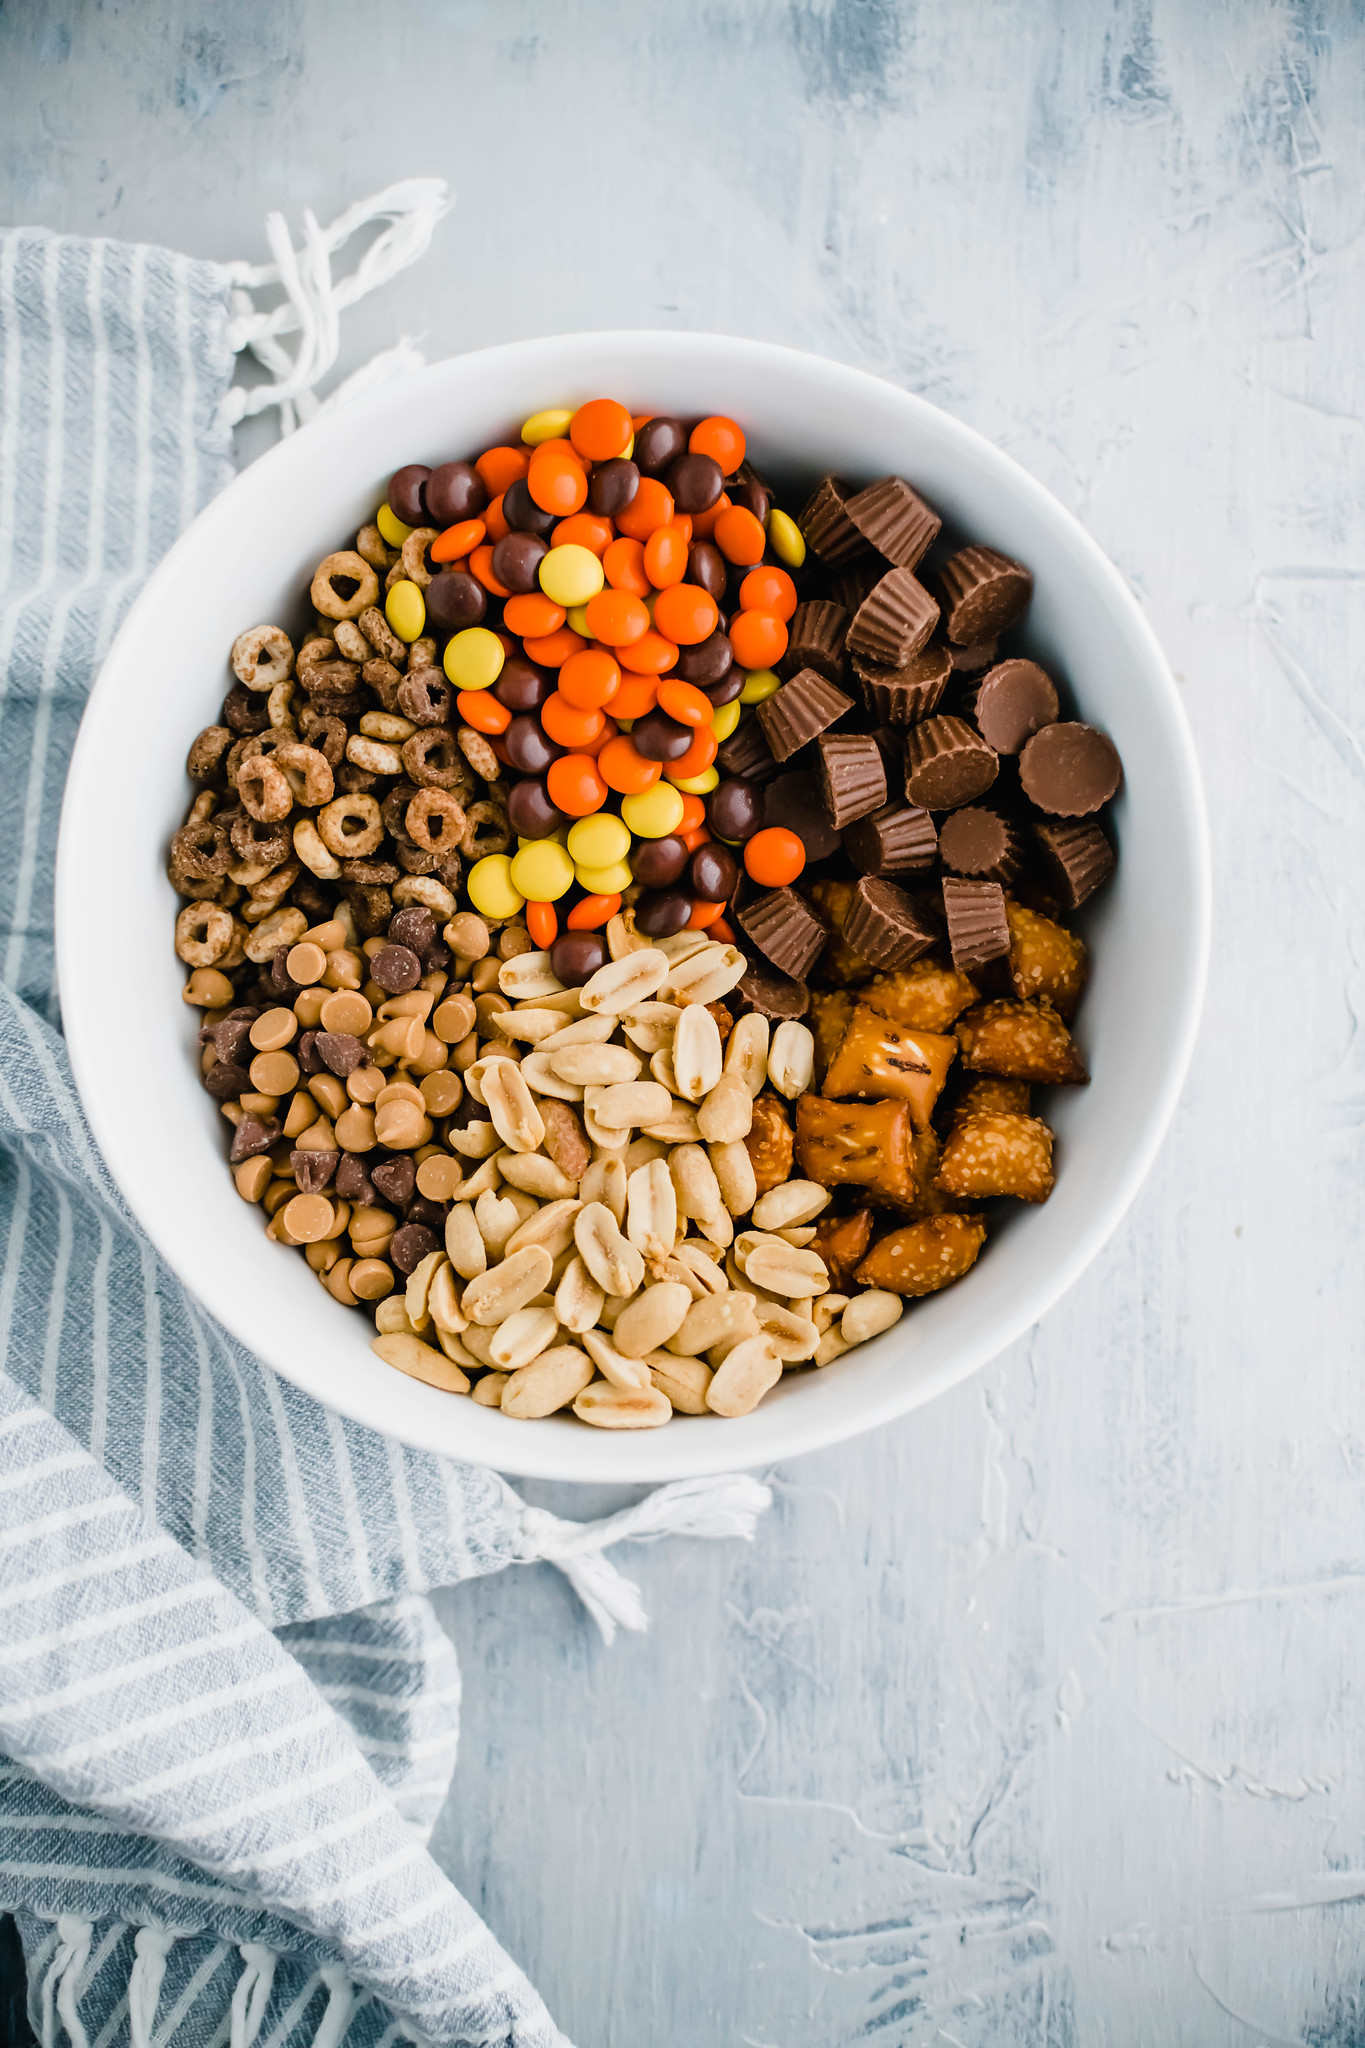 Ingredients for peanut butter trail mix in a bowl.